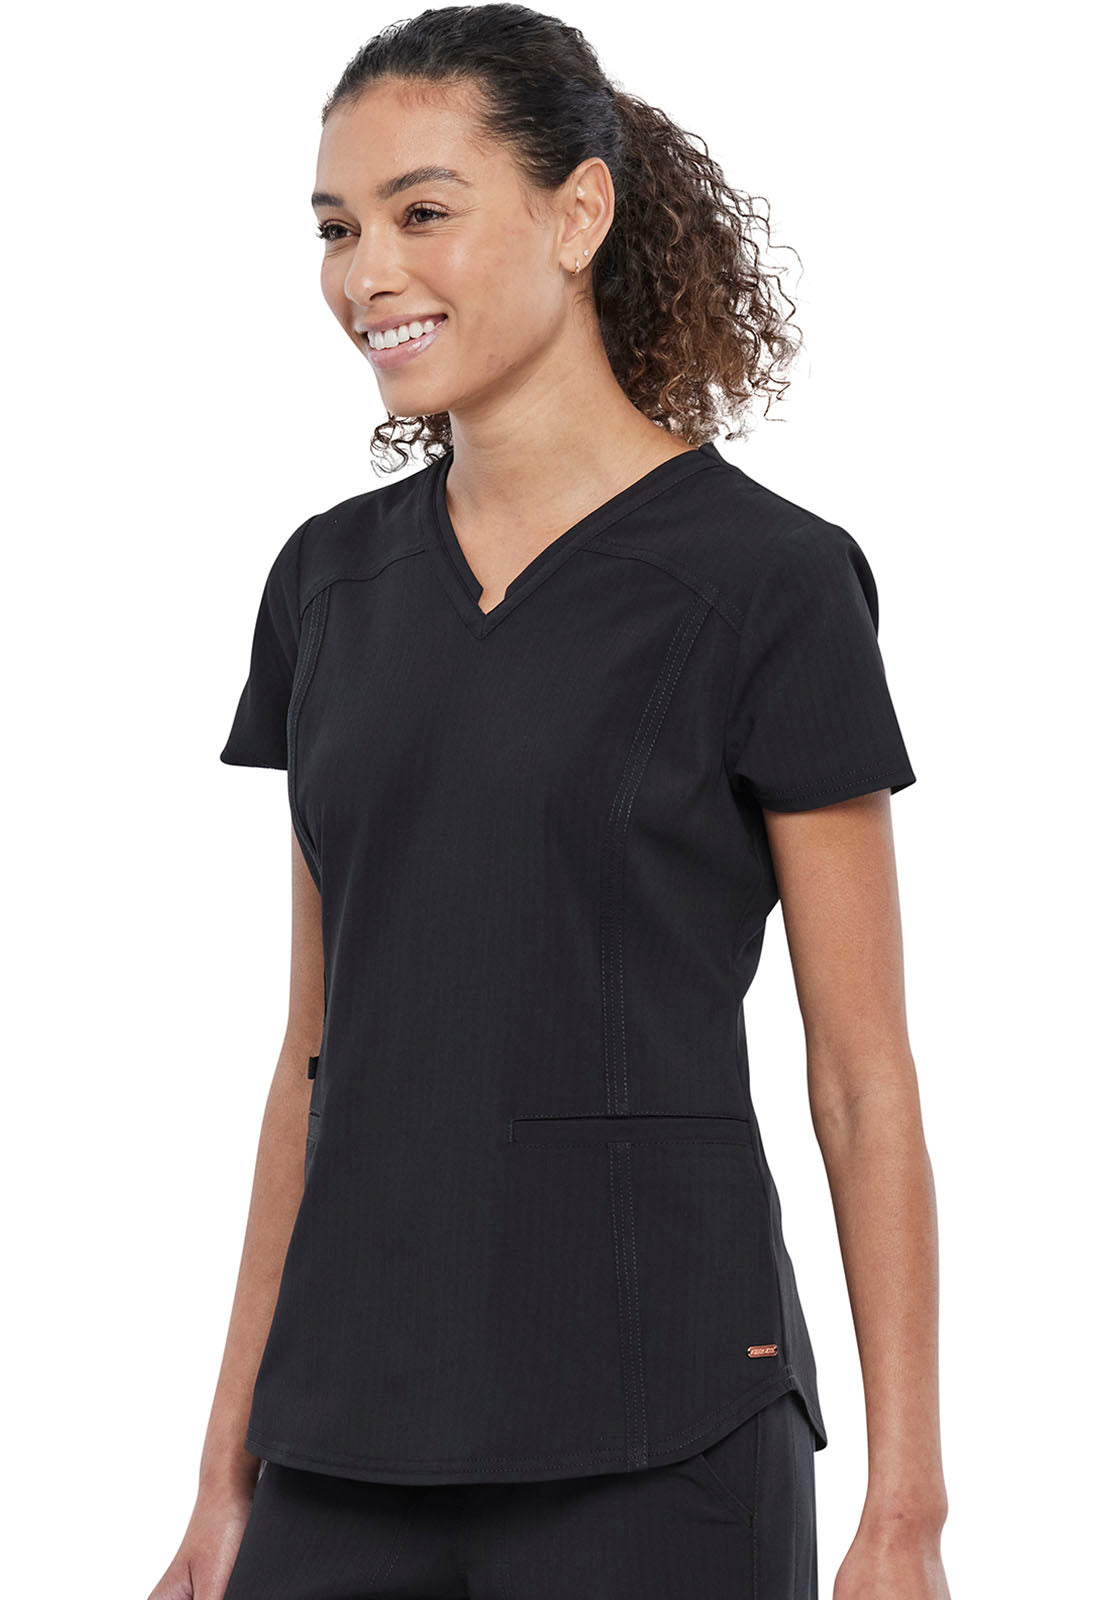 OUT Conj. Mujer Cherokee Statement Mod.CK798/CK177 Black